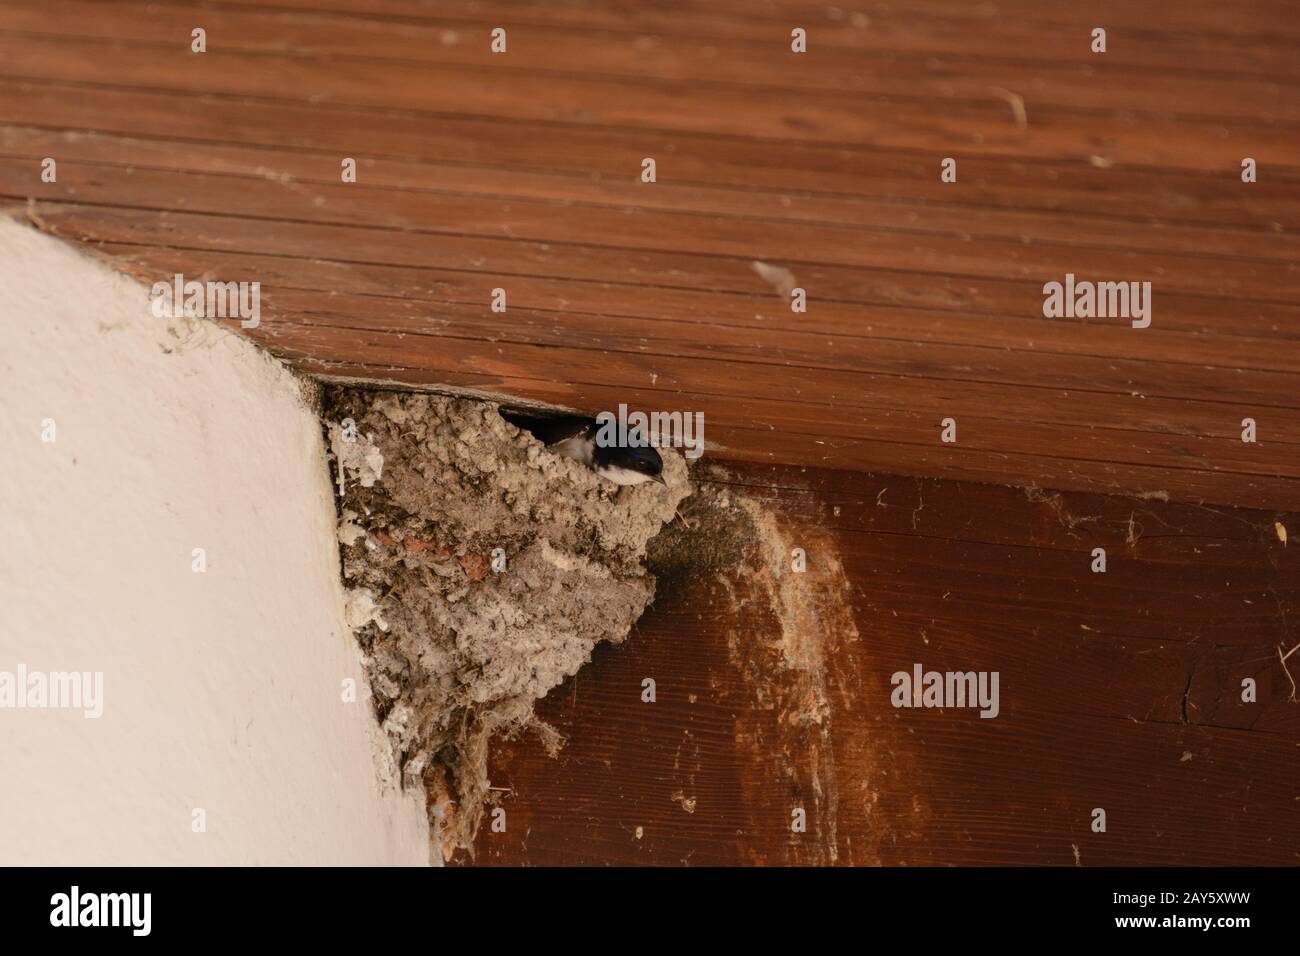 Swallow glances attentively from her nest Stock Photo